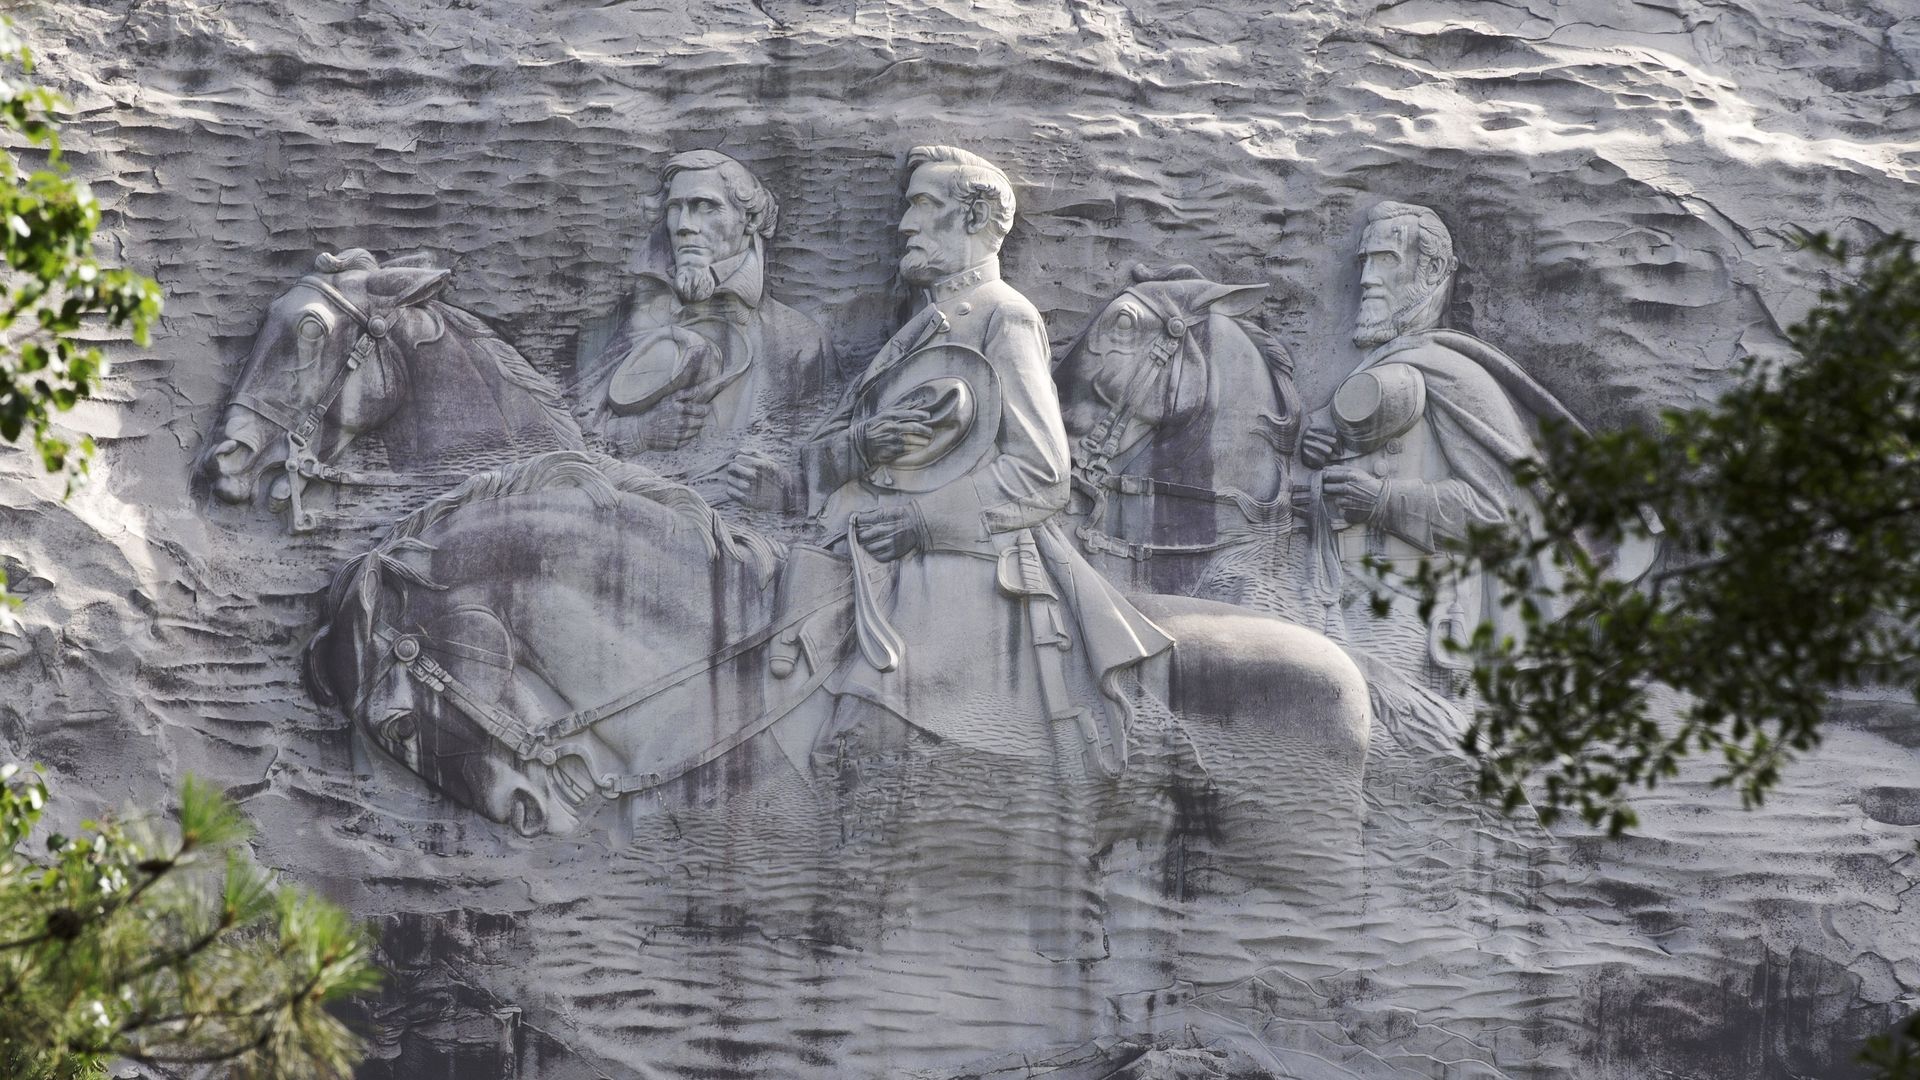 A photo of a large carving on the side of a stone mountain of Confederates riding horses